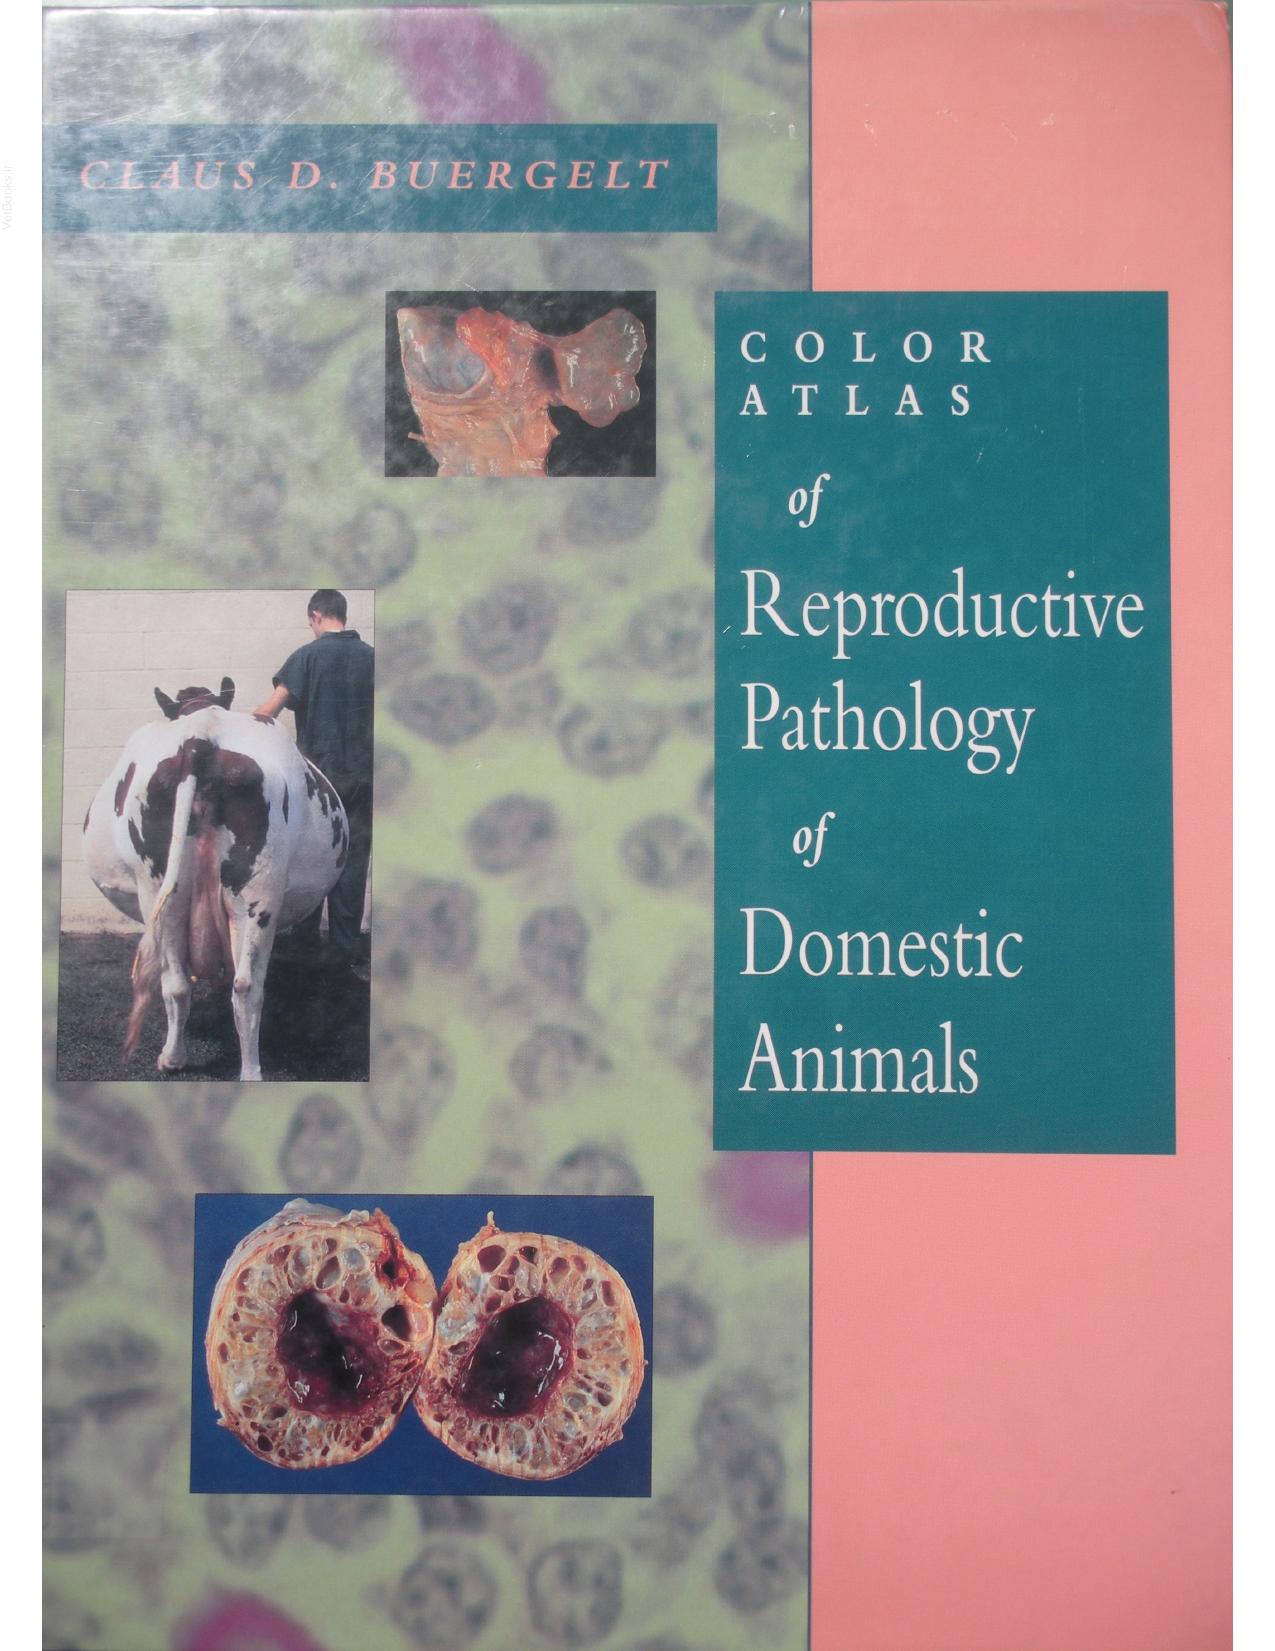 Color Atlas of Reproductive Pathology of Domestic Animals